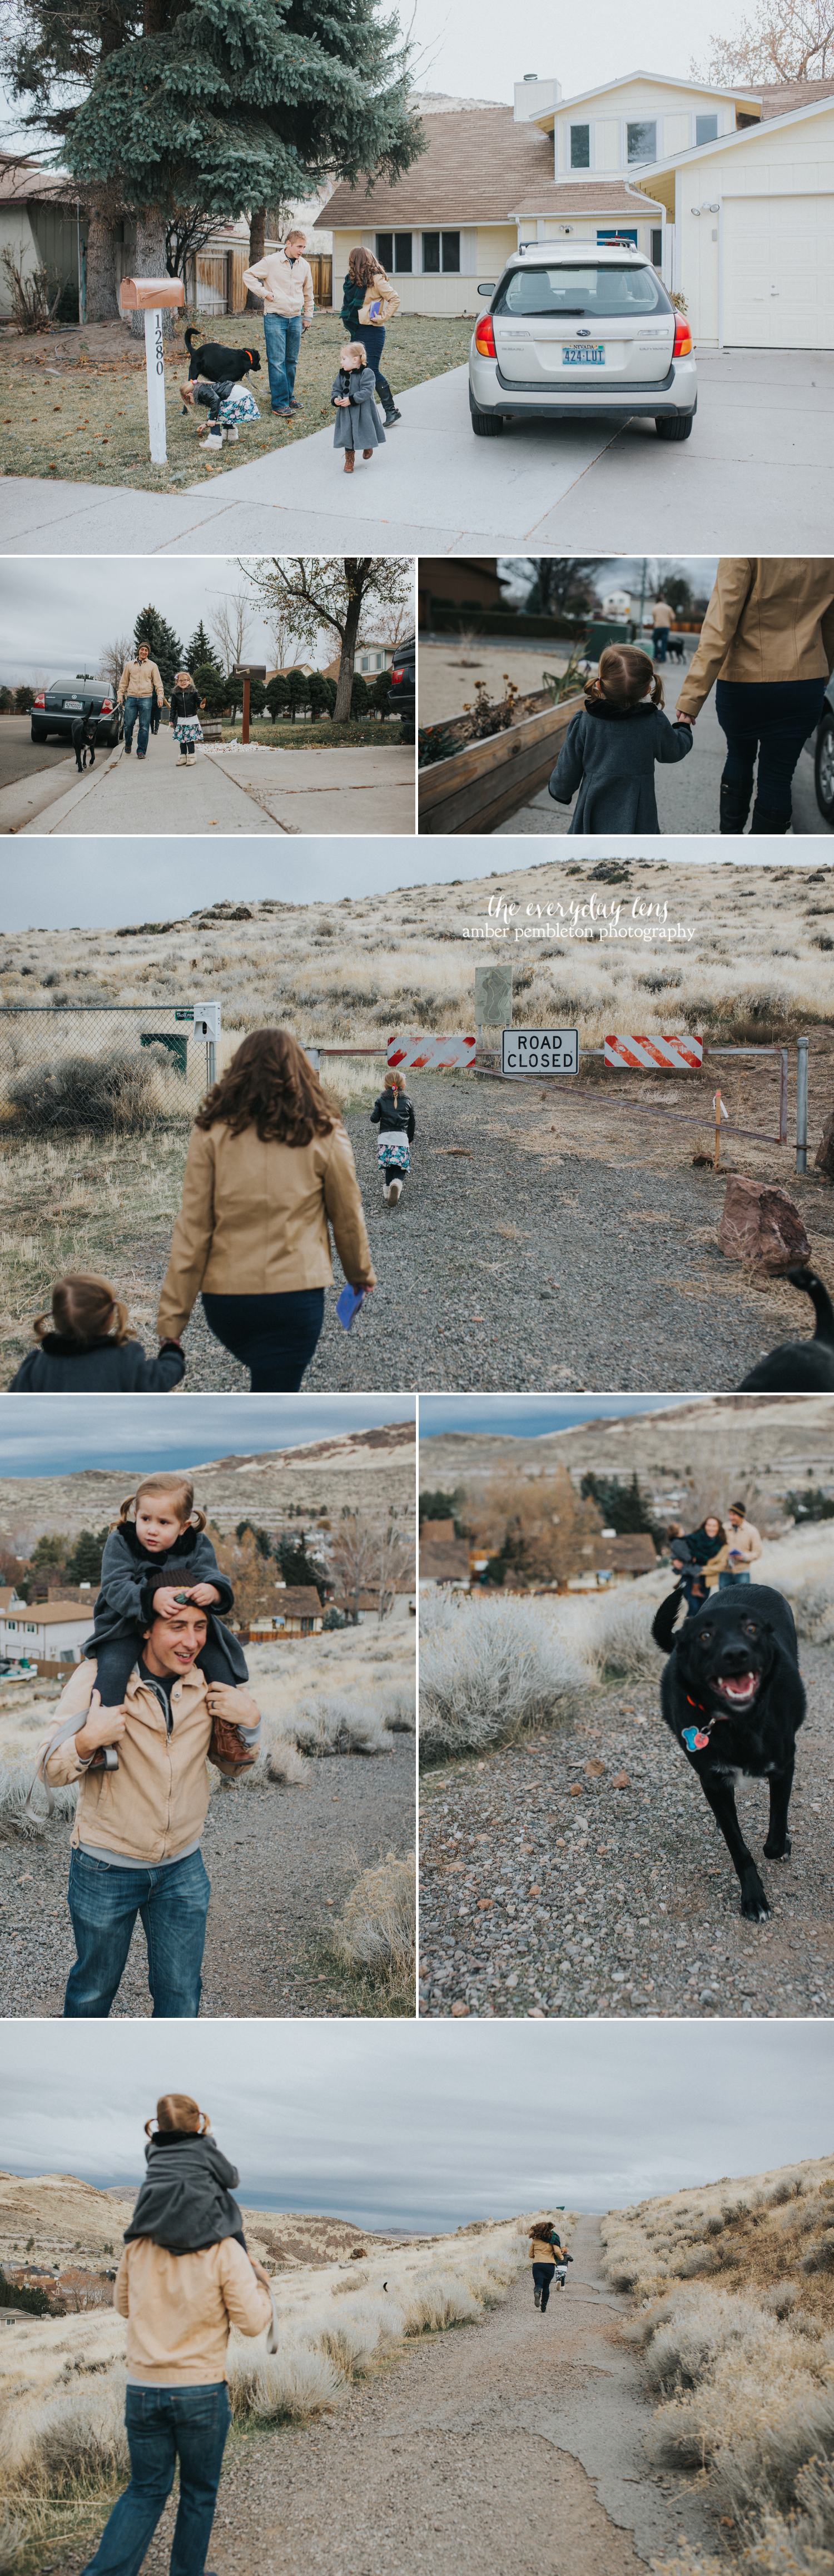 day-in-the-life-photography-session-nevada.jpg